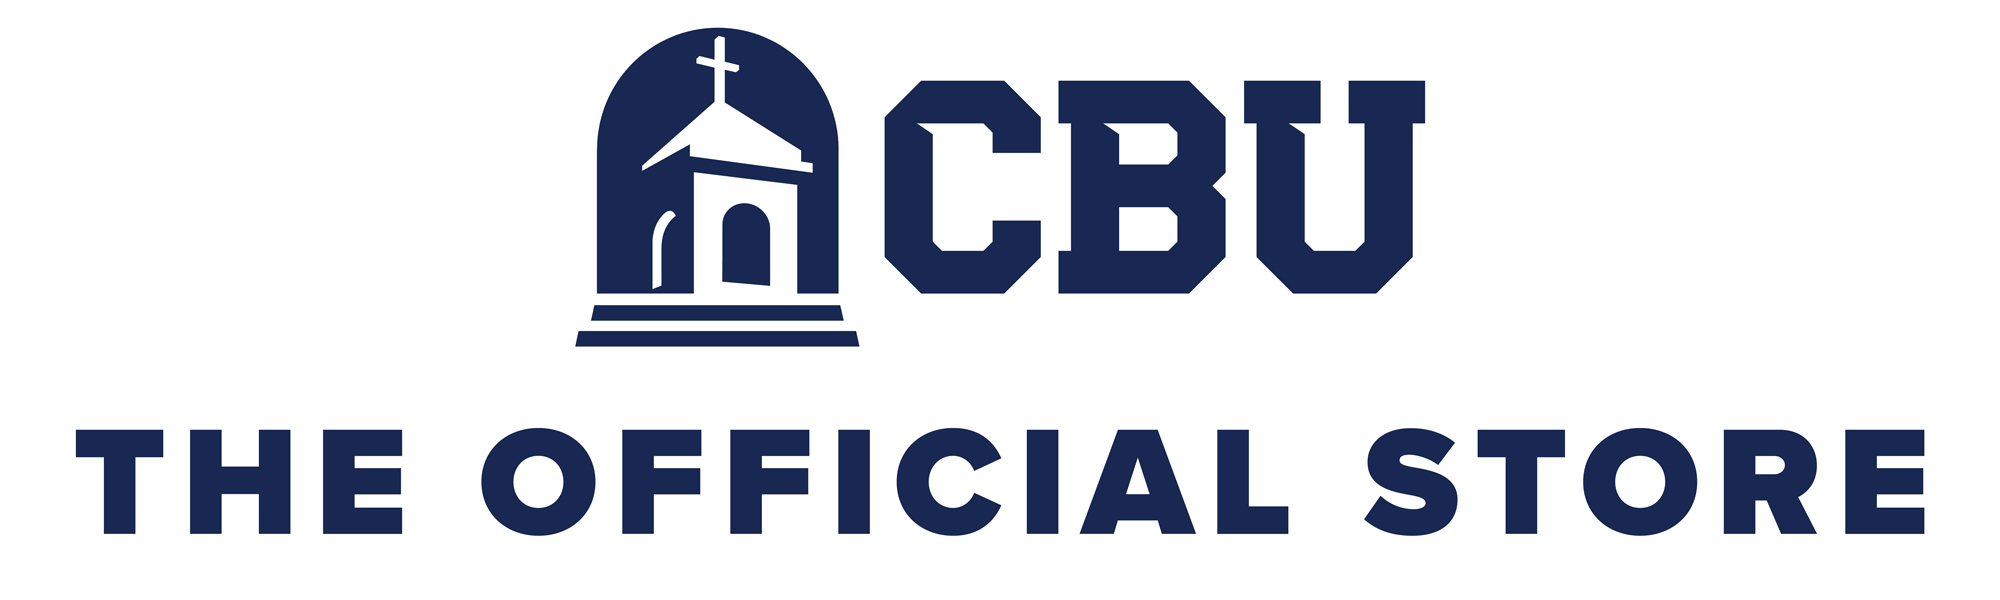 CBU - The Official Store